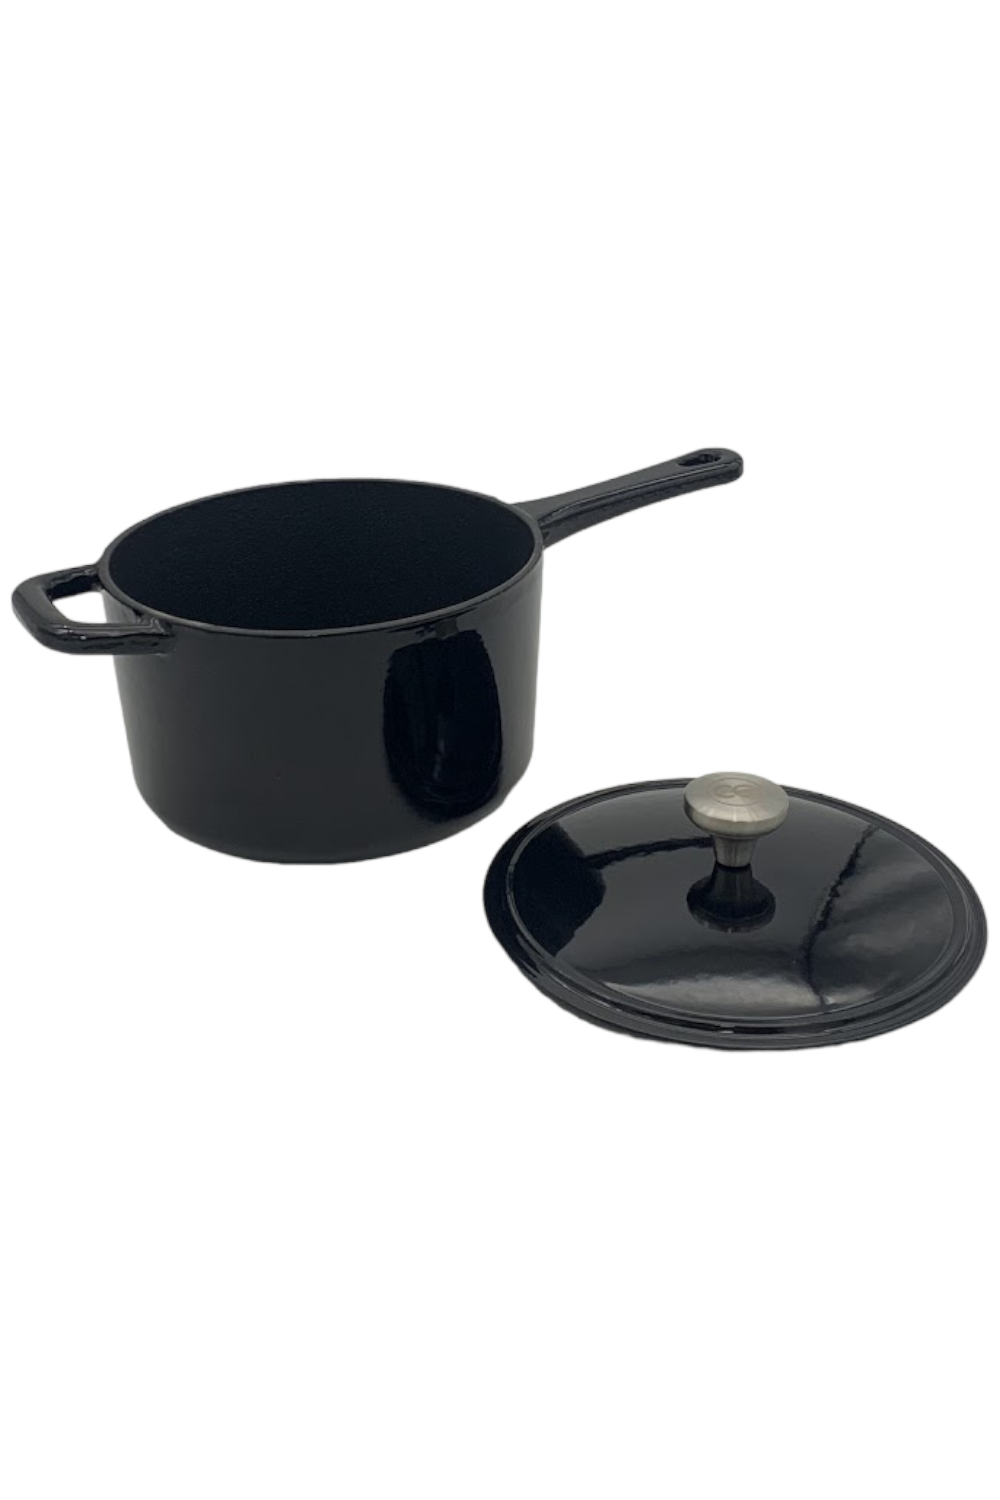 Cook's Essentials 3.5-qt Covered Cast Iron Sauce Pan